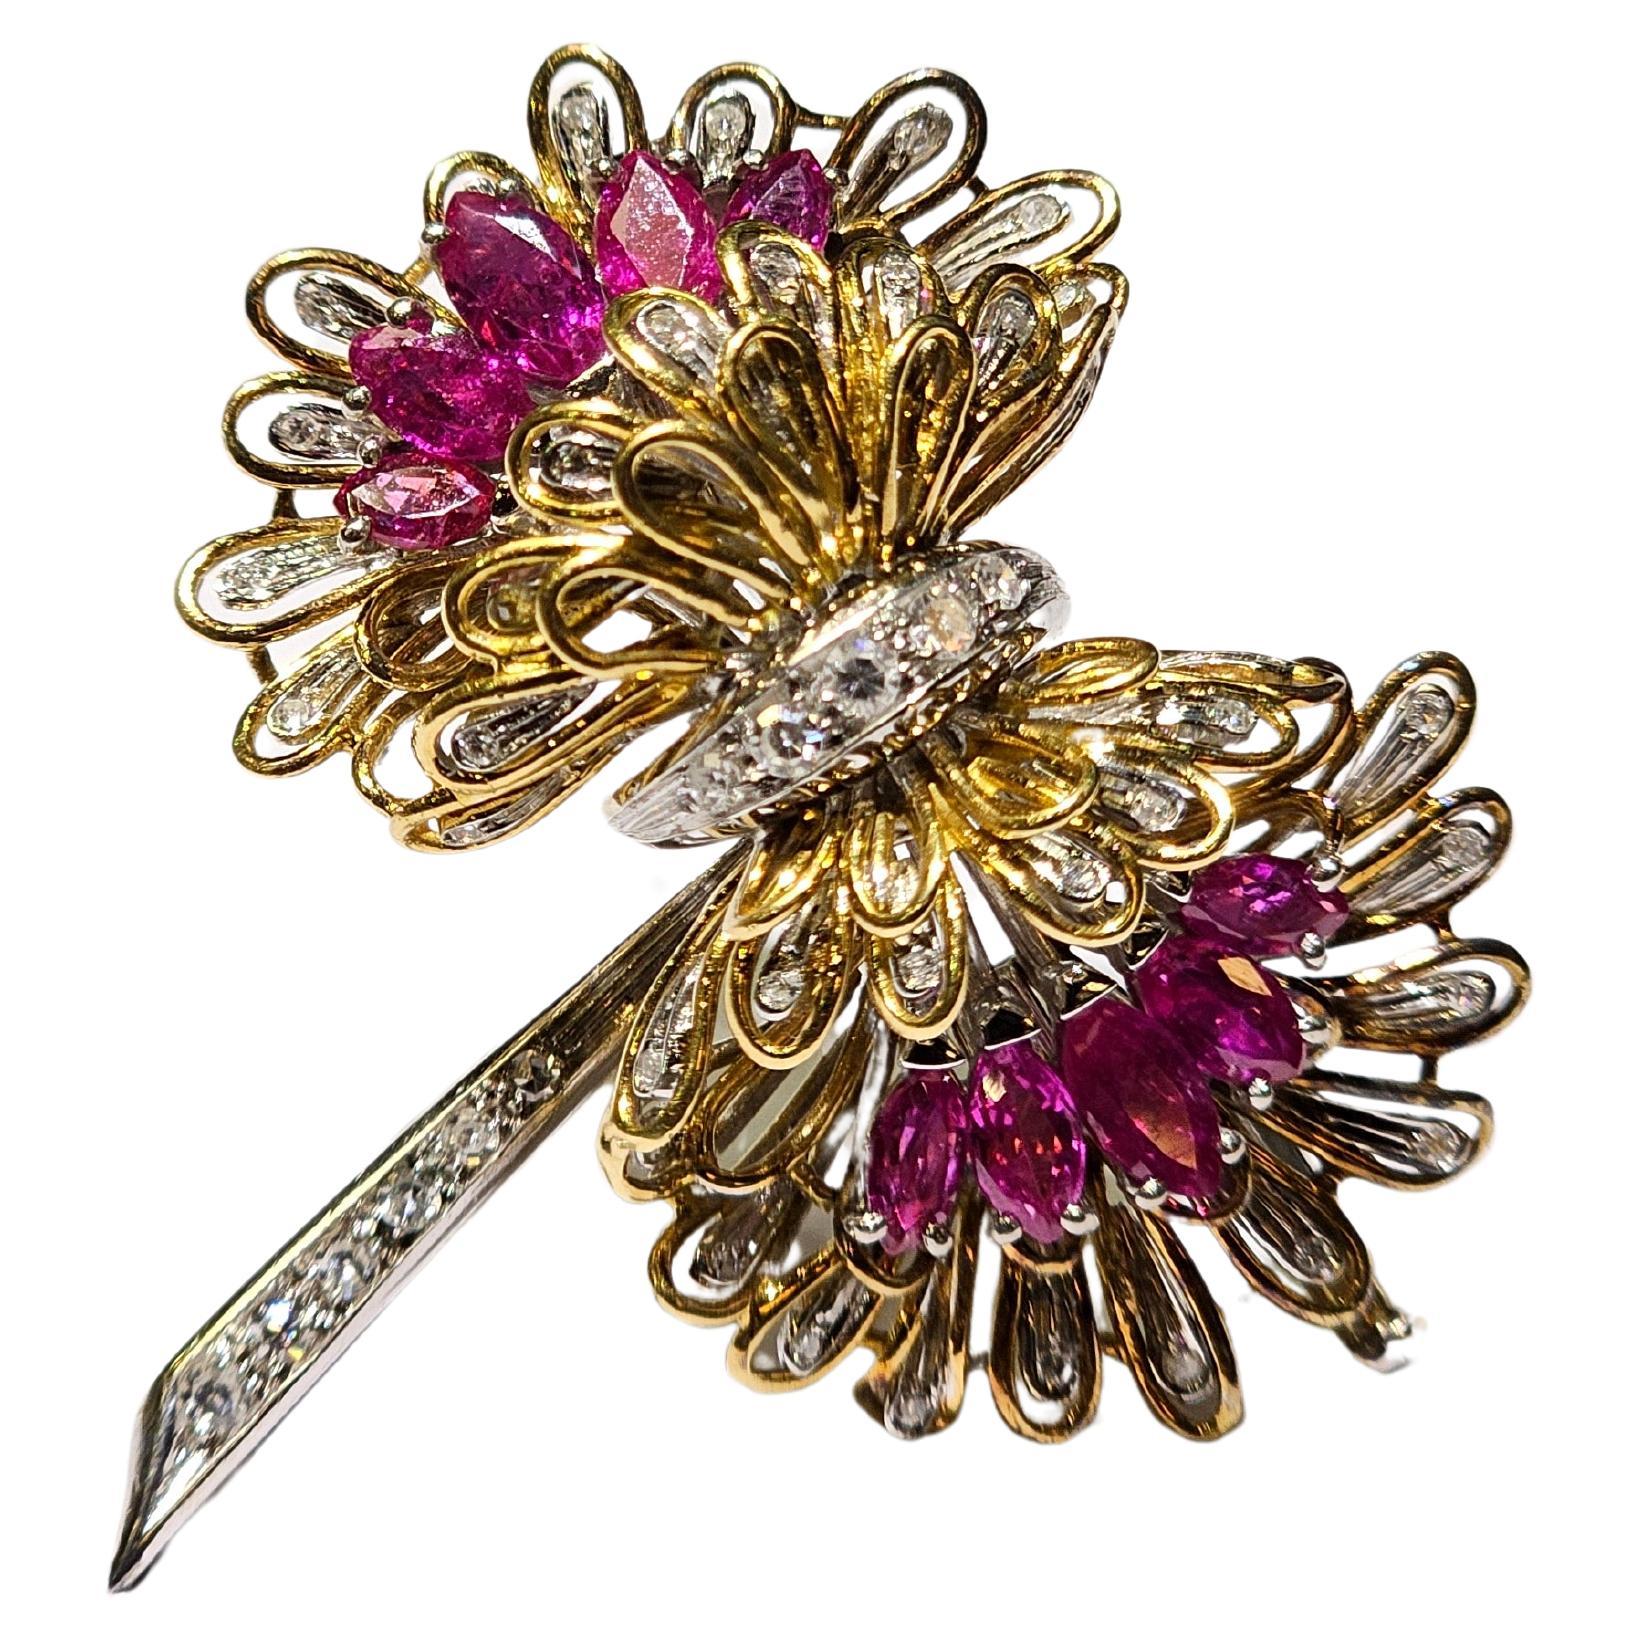 Ruby & Diamond Brooch

An 18-karat two tone gold brooch set with marquise cut rubies and round cut diamonds

Stamped Italy and 18K

Measurements: 1.75